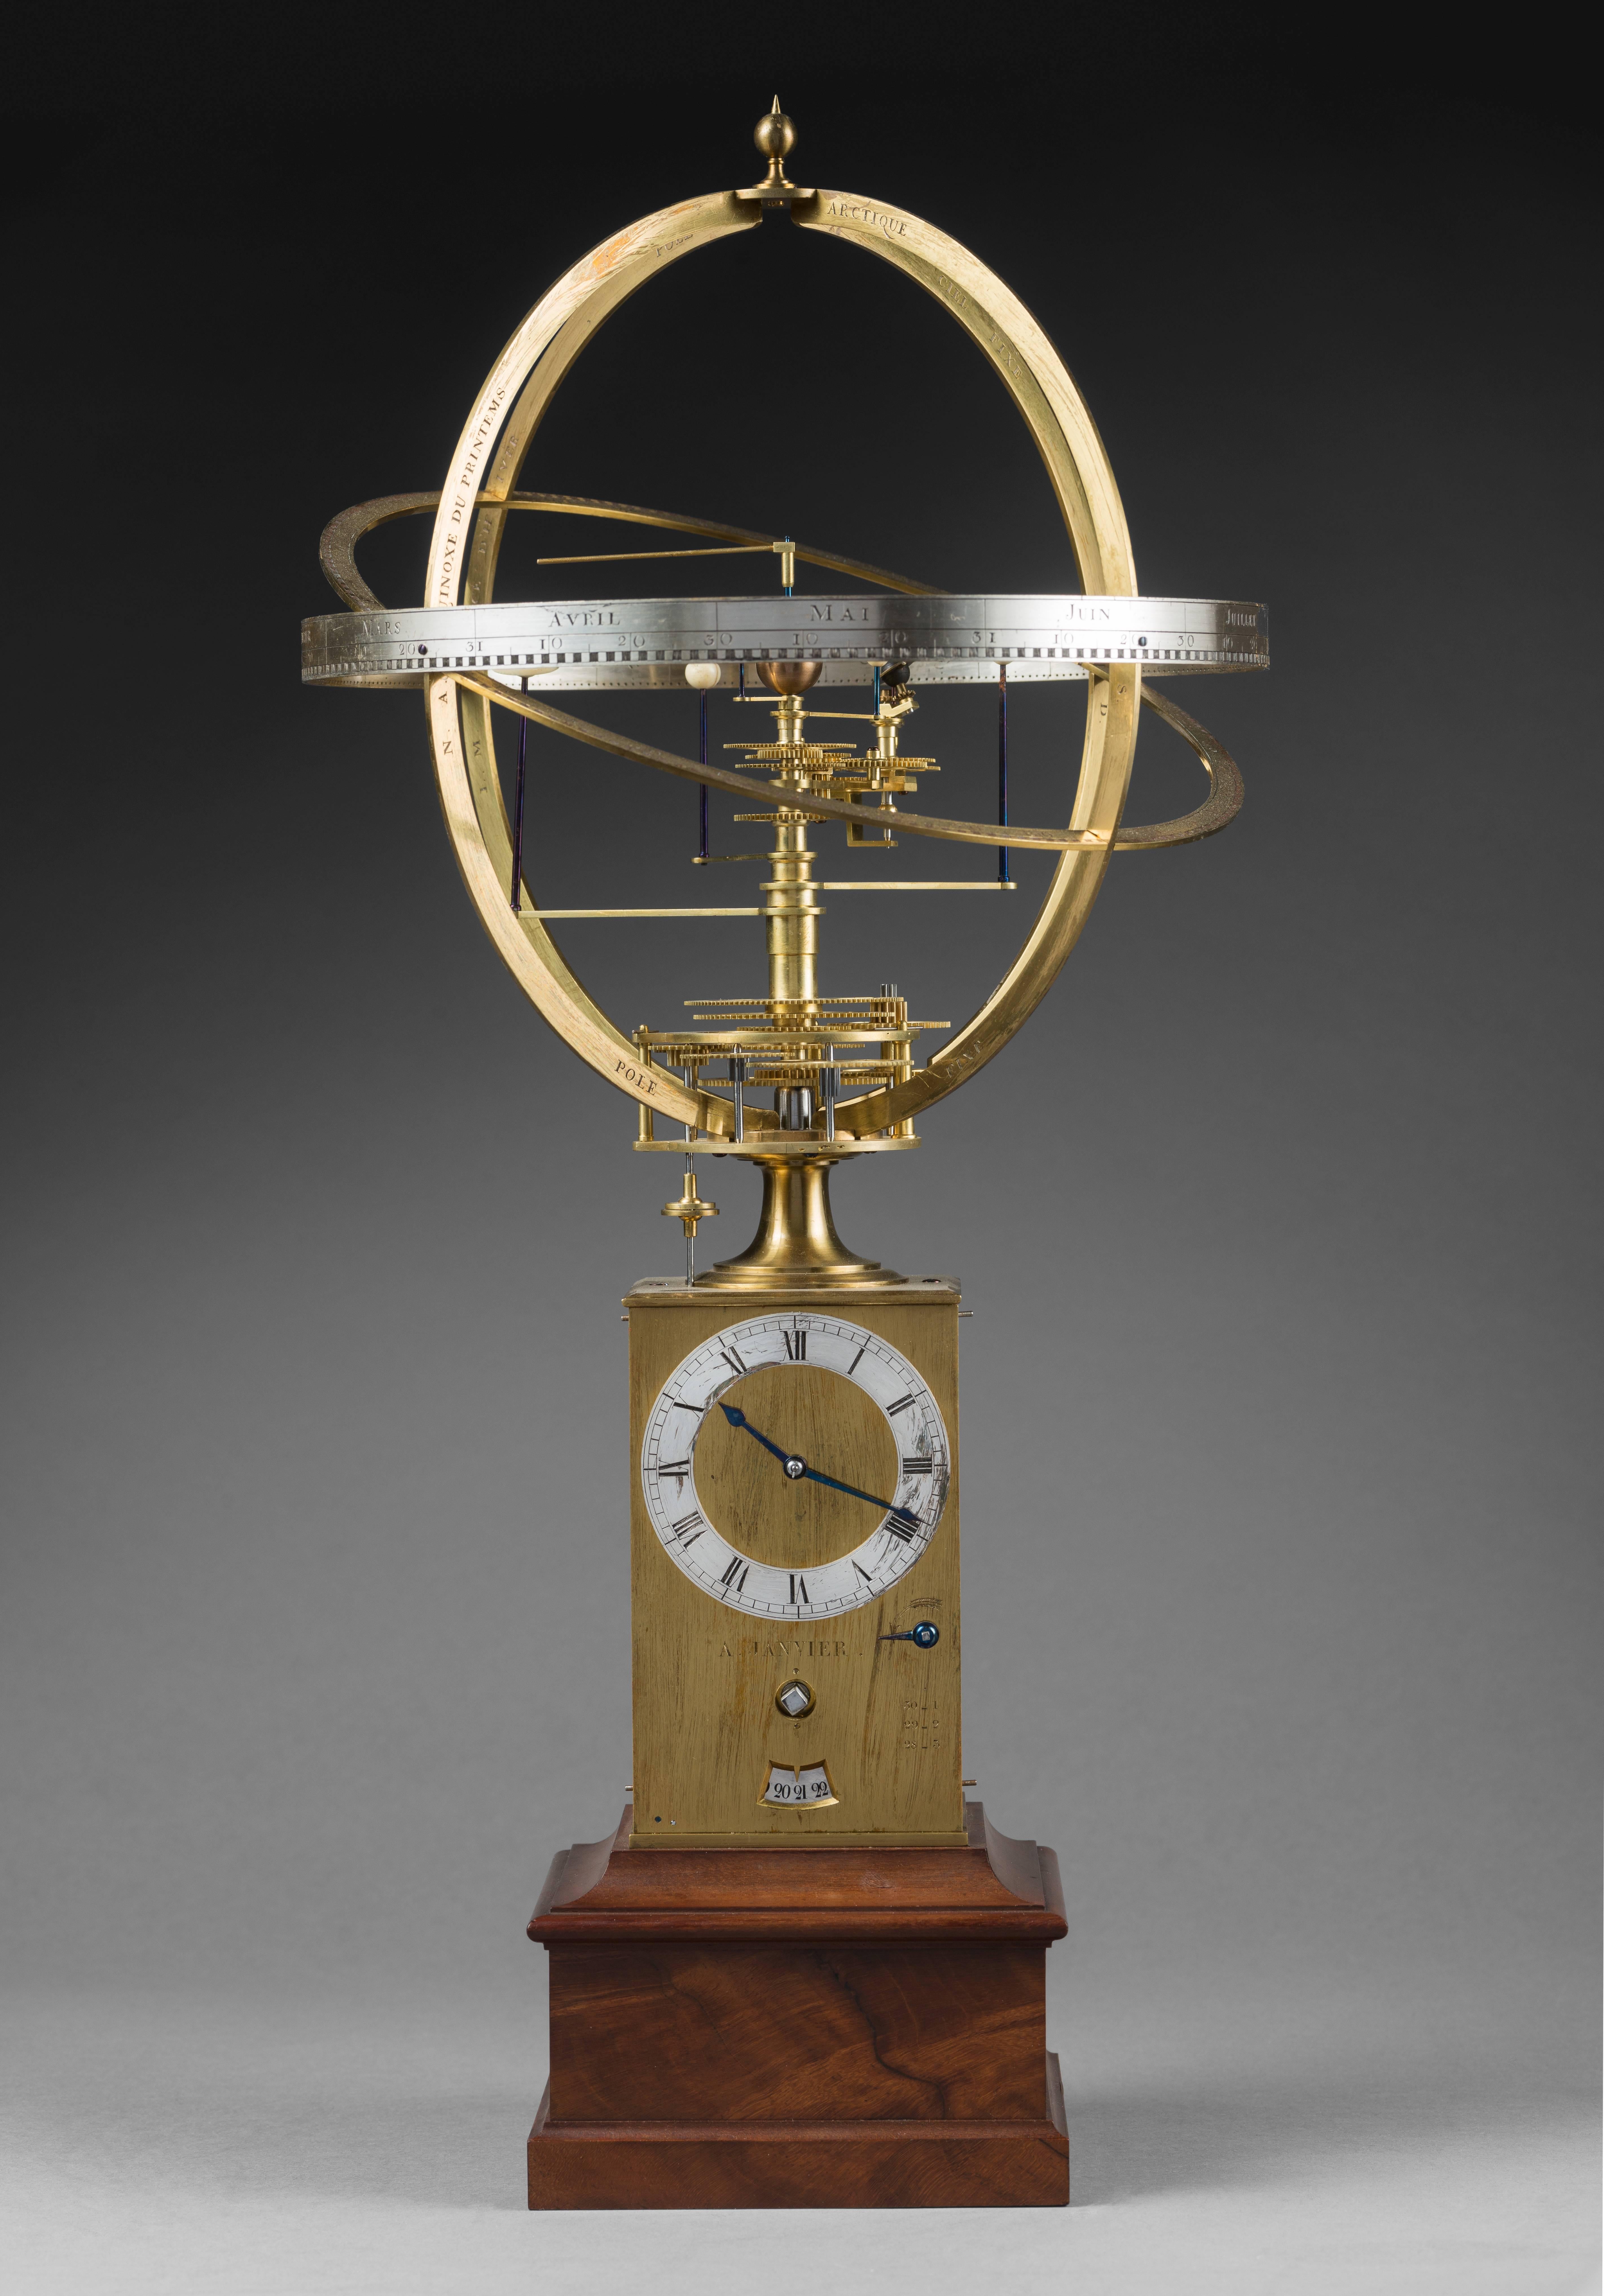 Antide Janvier 
The mahogany base attributed to Ferdinand Schwerdfeger 
exceptional planetarium clock. 
A horological masterpiece.

Paris, begun in 1774 and finished in 1825. 
Measure: Height 51 cm; width 28 cm; depth 28 cm.